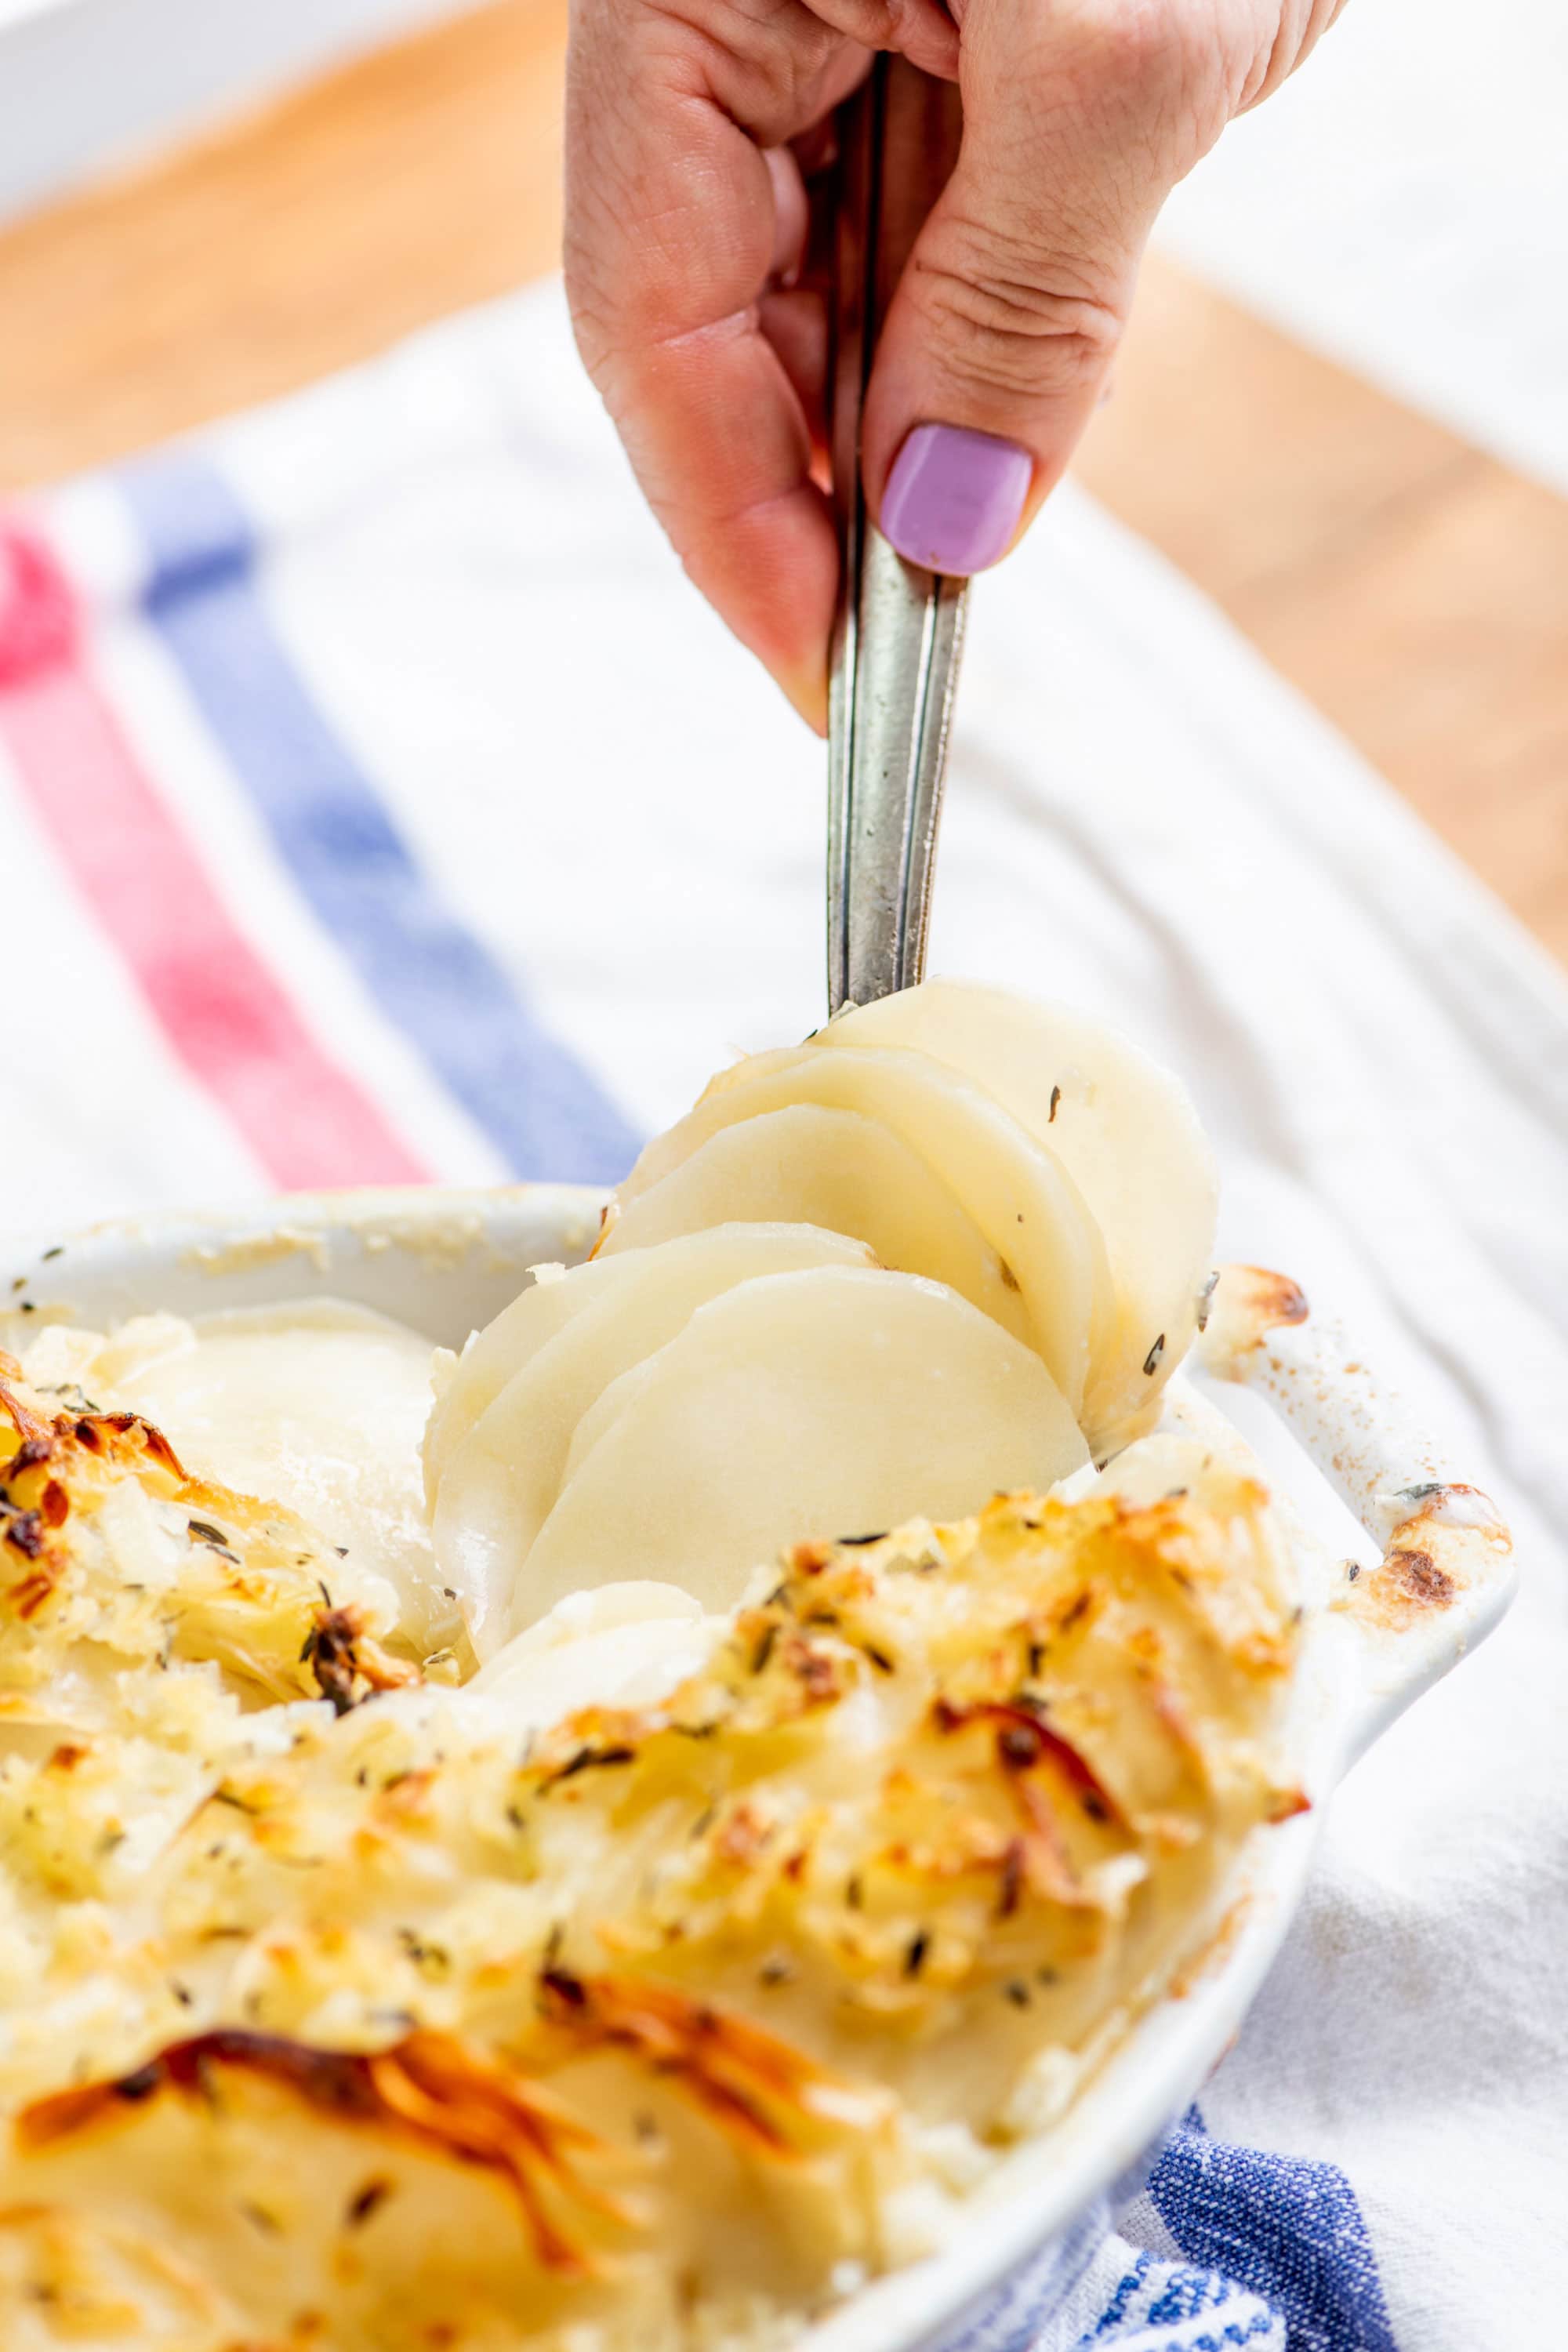 Spoon lifting a serving of Homemade Scalloped Potatoes.